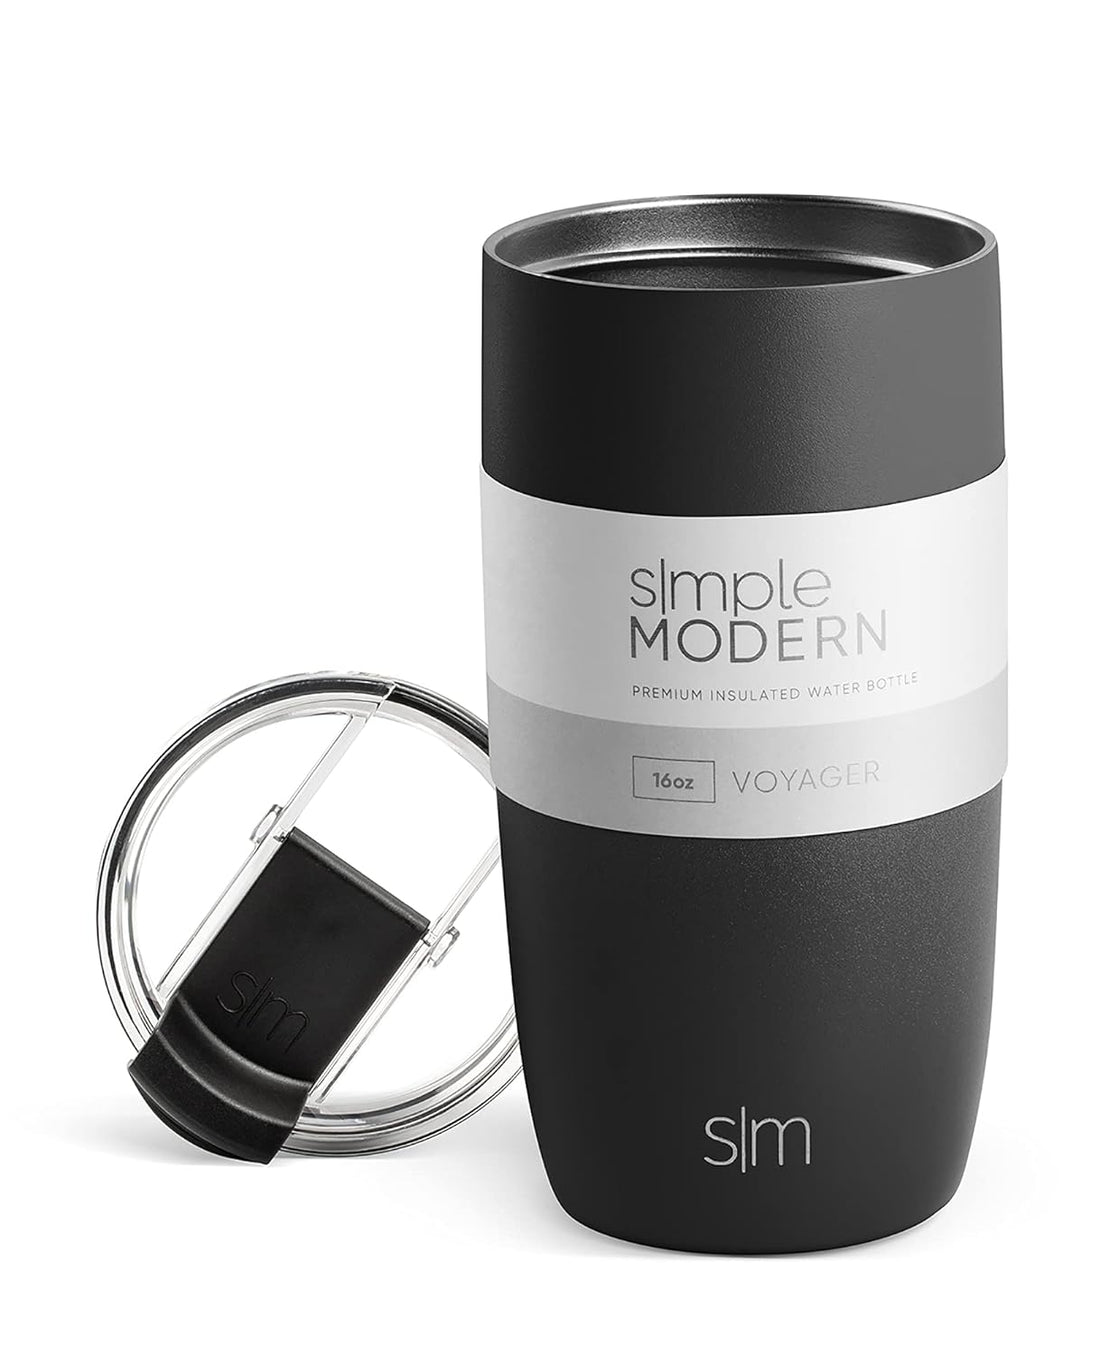 Simple Modern 16oz Voyager Travel Mug Tumbler w/Clear Flip Lid & Straw - Coffee Cup Vacuum Insulated Flask 18/8 Stainless Steel Hydro Water Bottle -Midnight Black